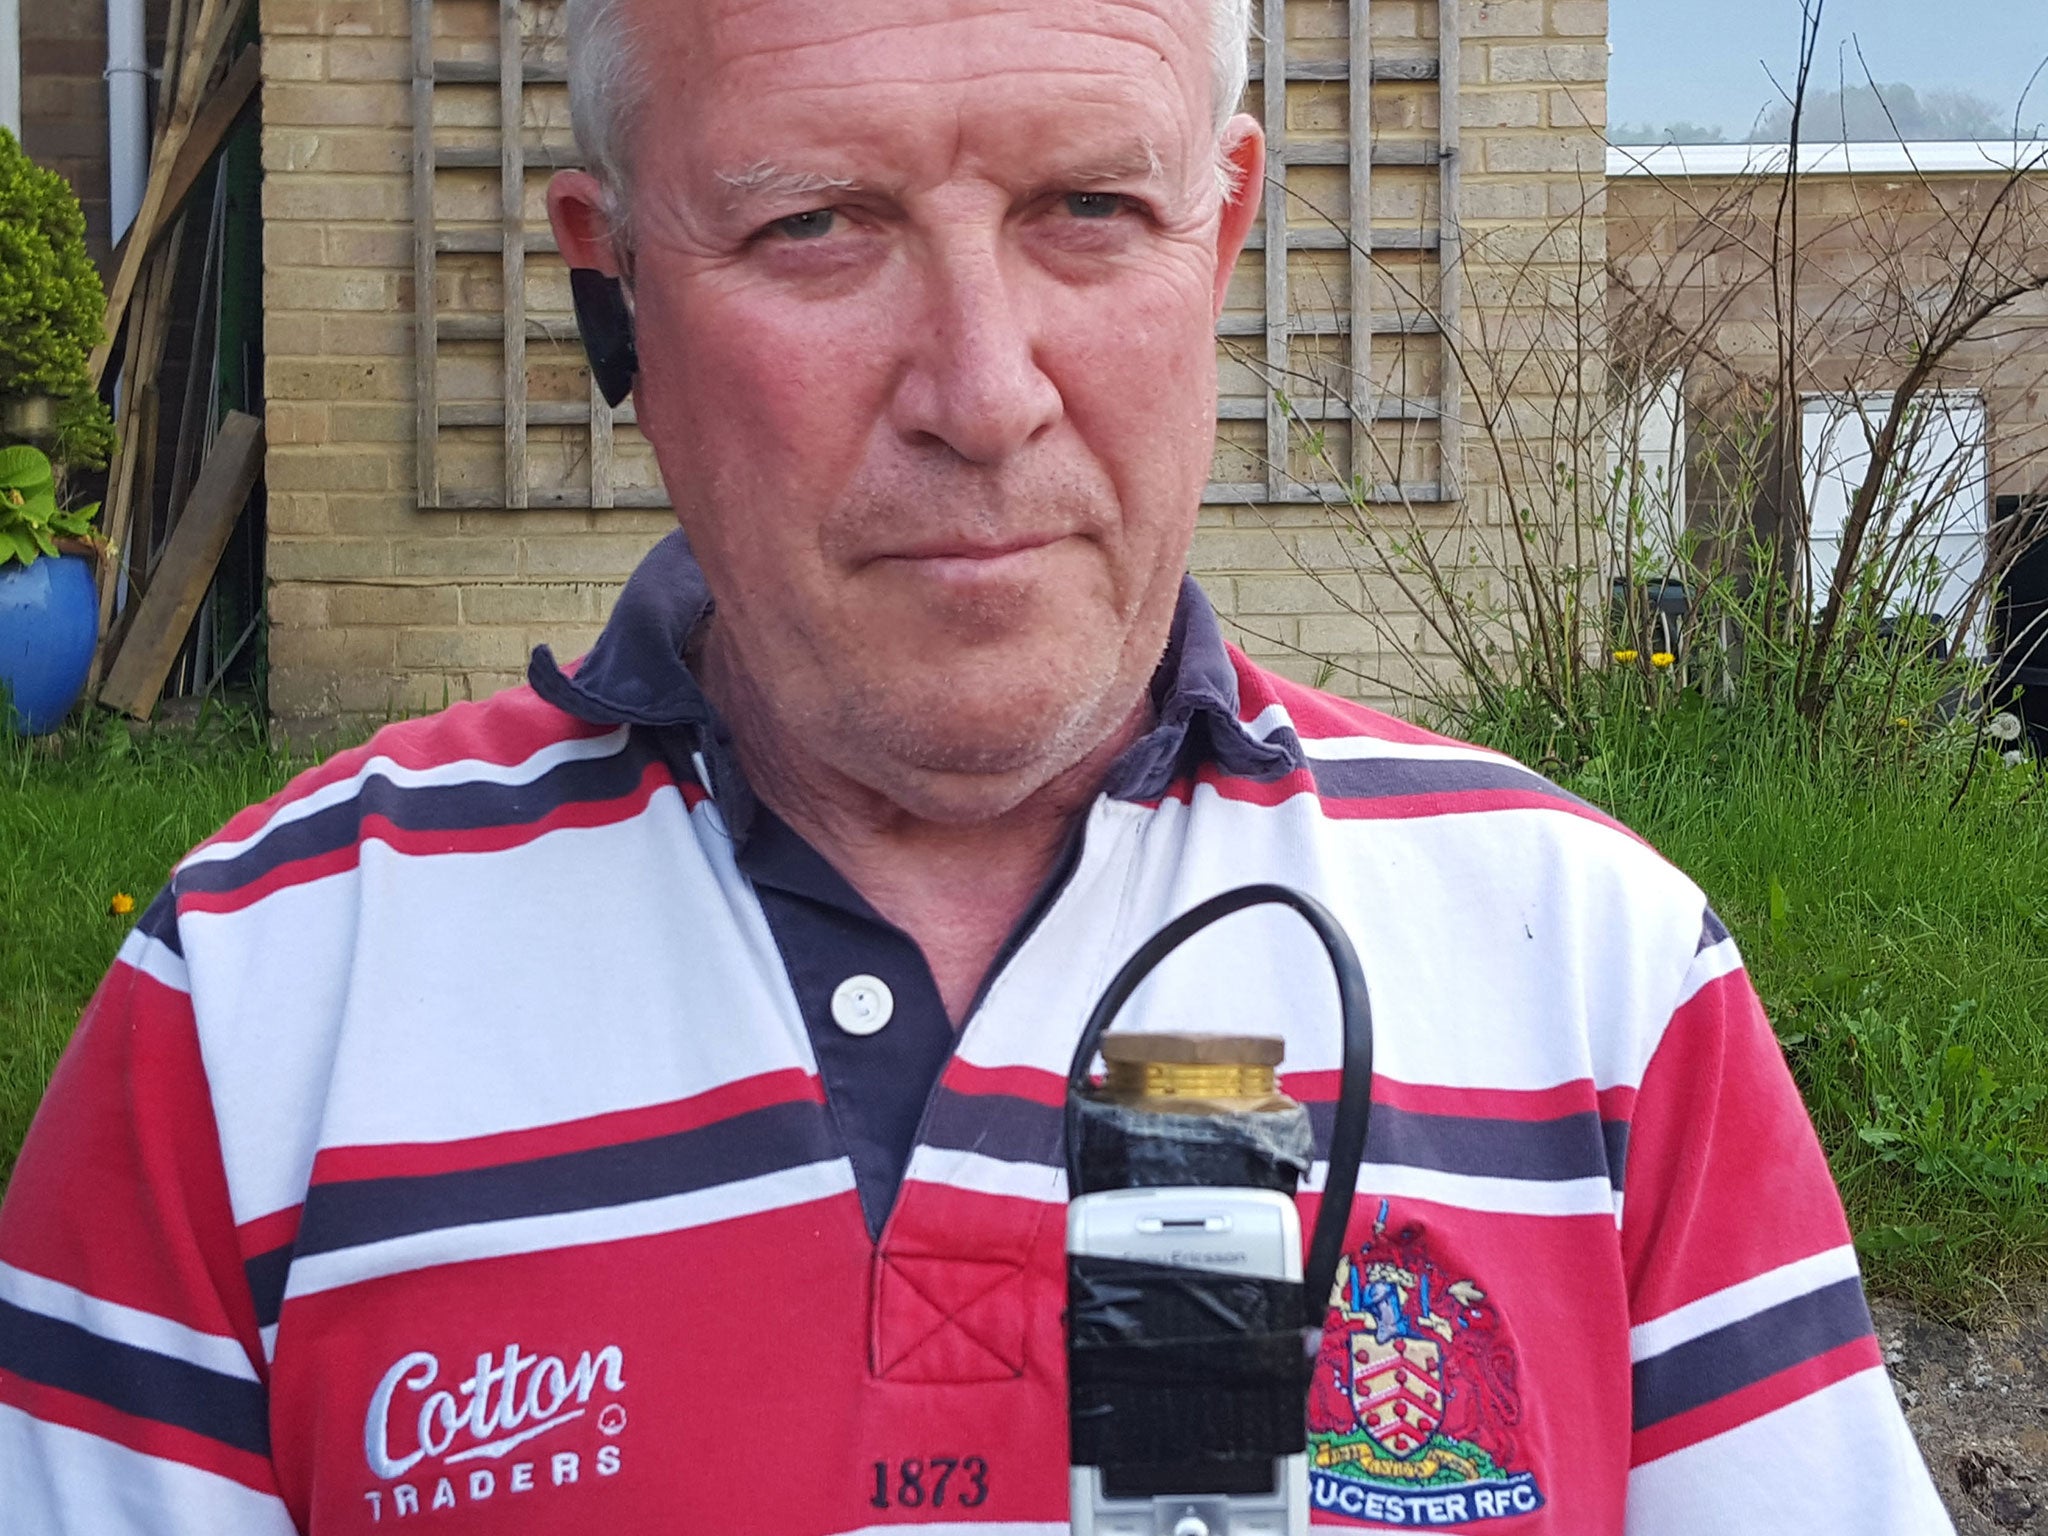 Chris Reid, MD of Security Search Management and Solutions Ltd, one of the firms responsible, holds a similar device to the one that was abandoned, a mobile phone taped to a gas pipe